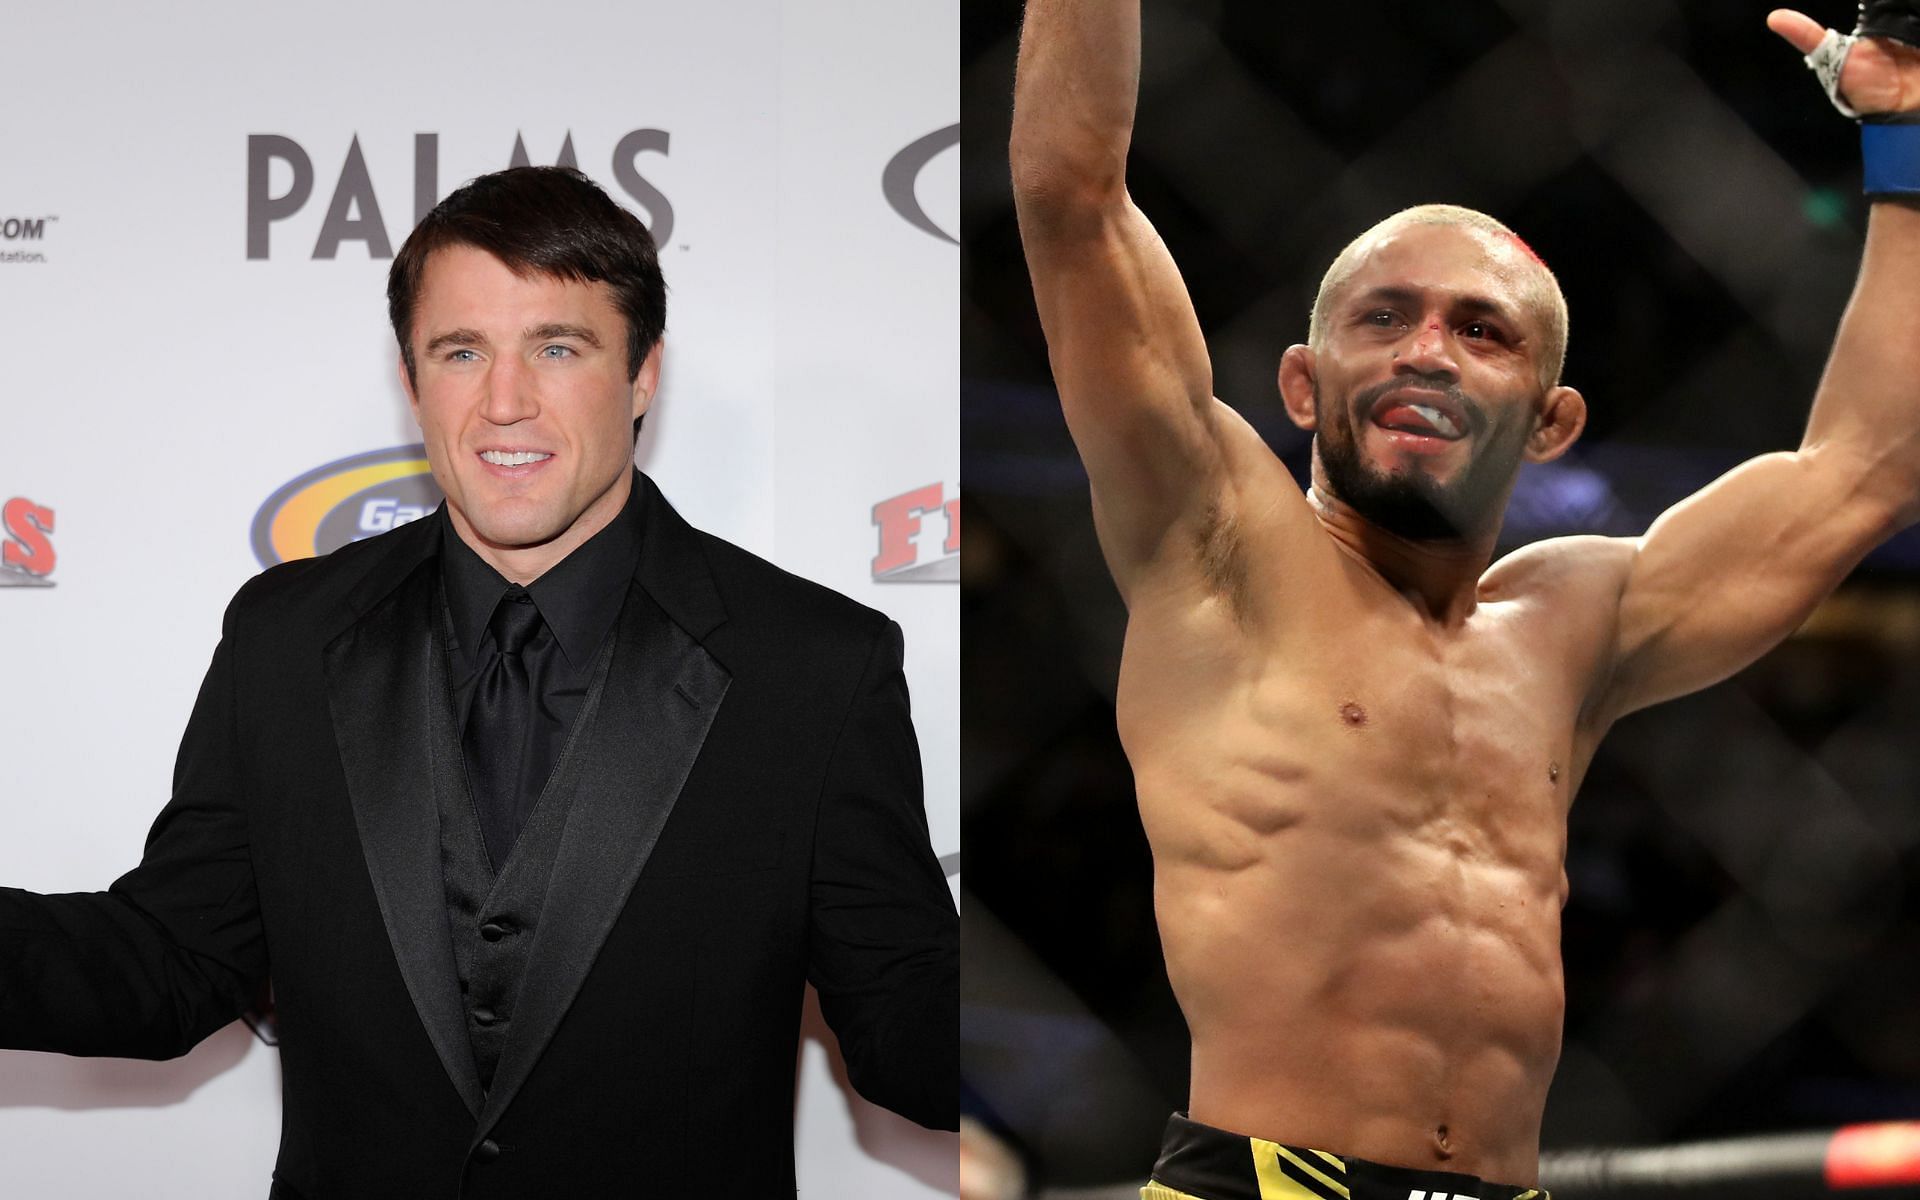 Chael Sonnen (L) and Deiveson Figueiredo (R)